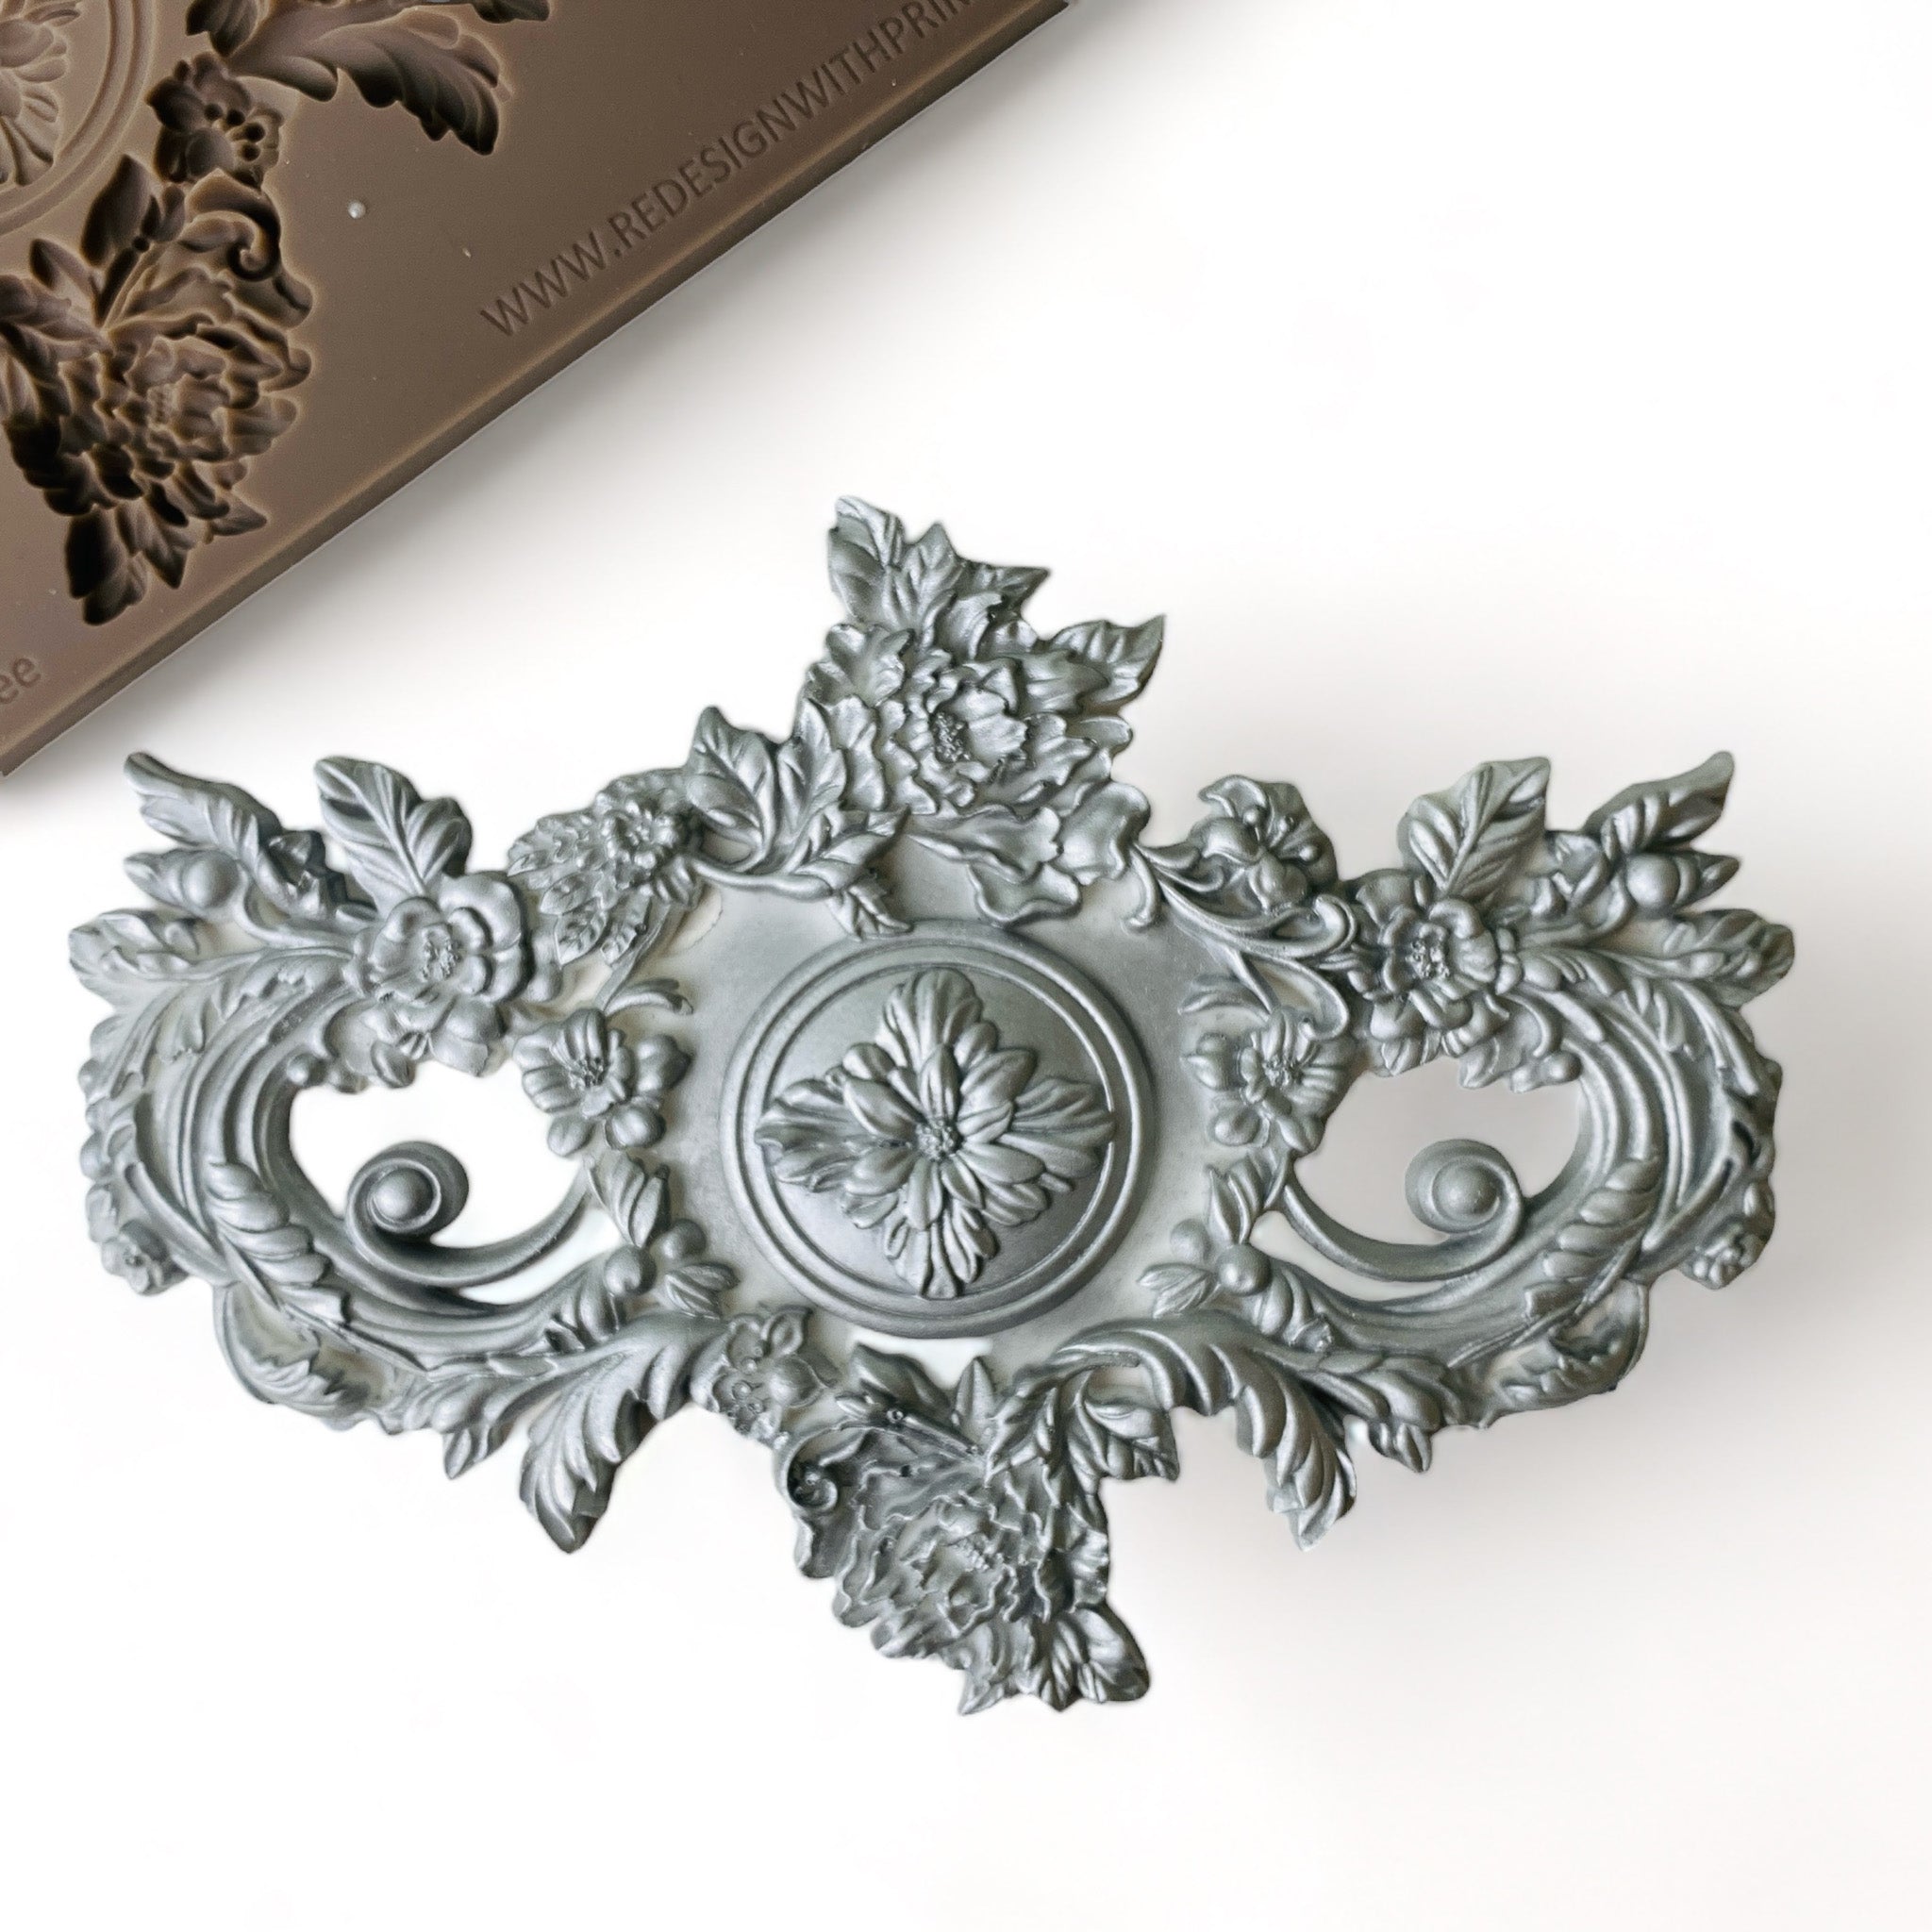 A brown silicone mold and silver-colored casting of a large ornate floral accented medallion center piece are against a white background.